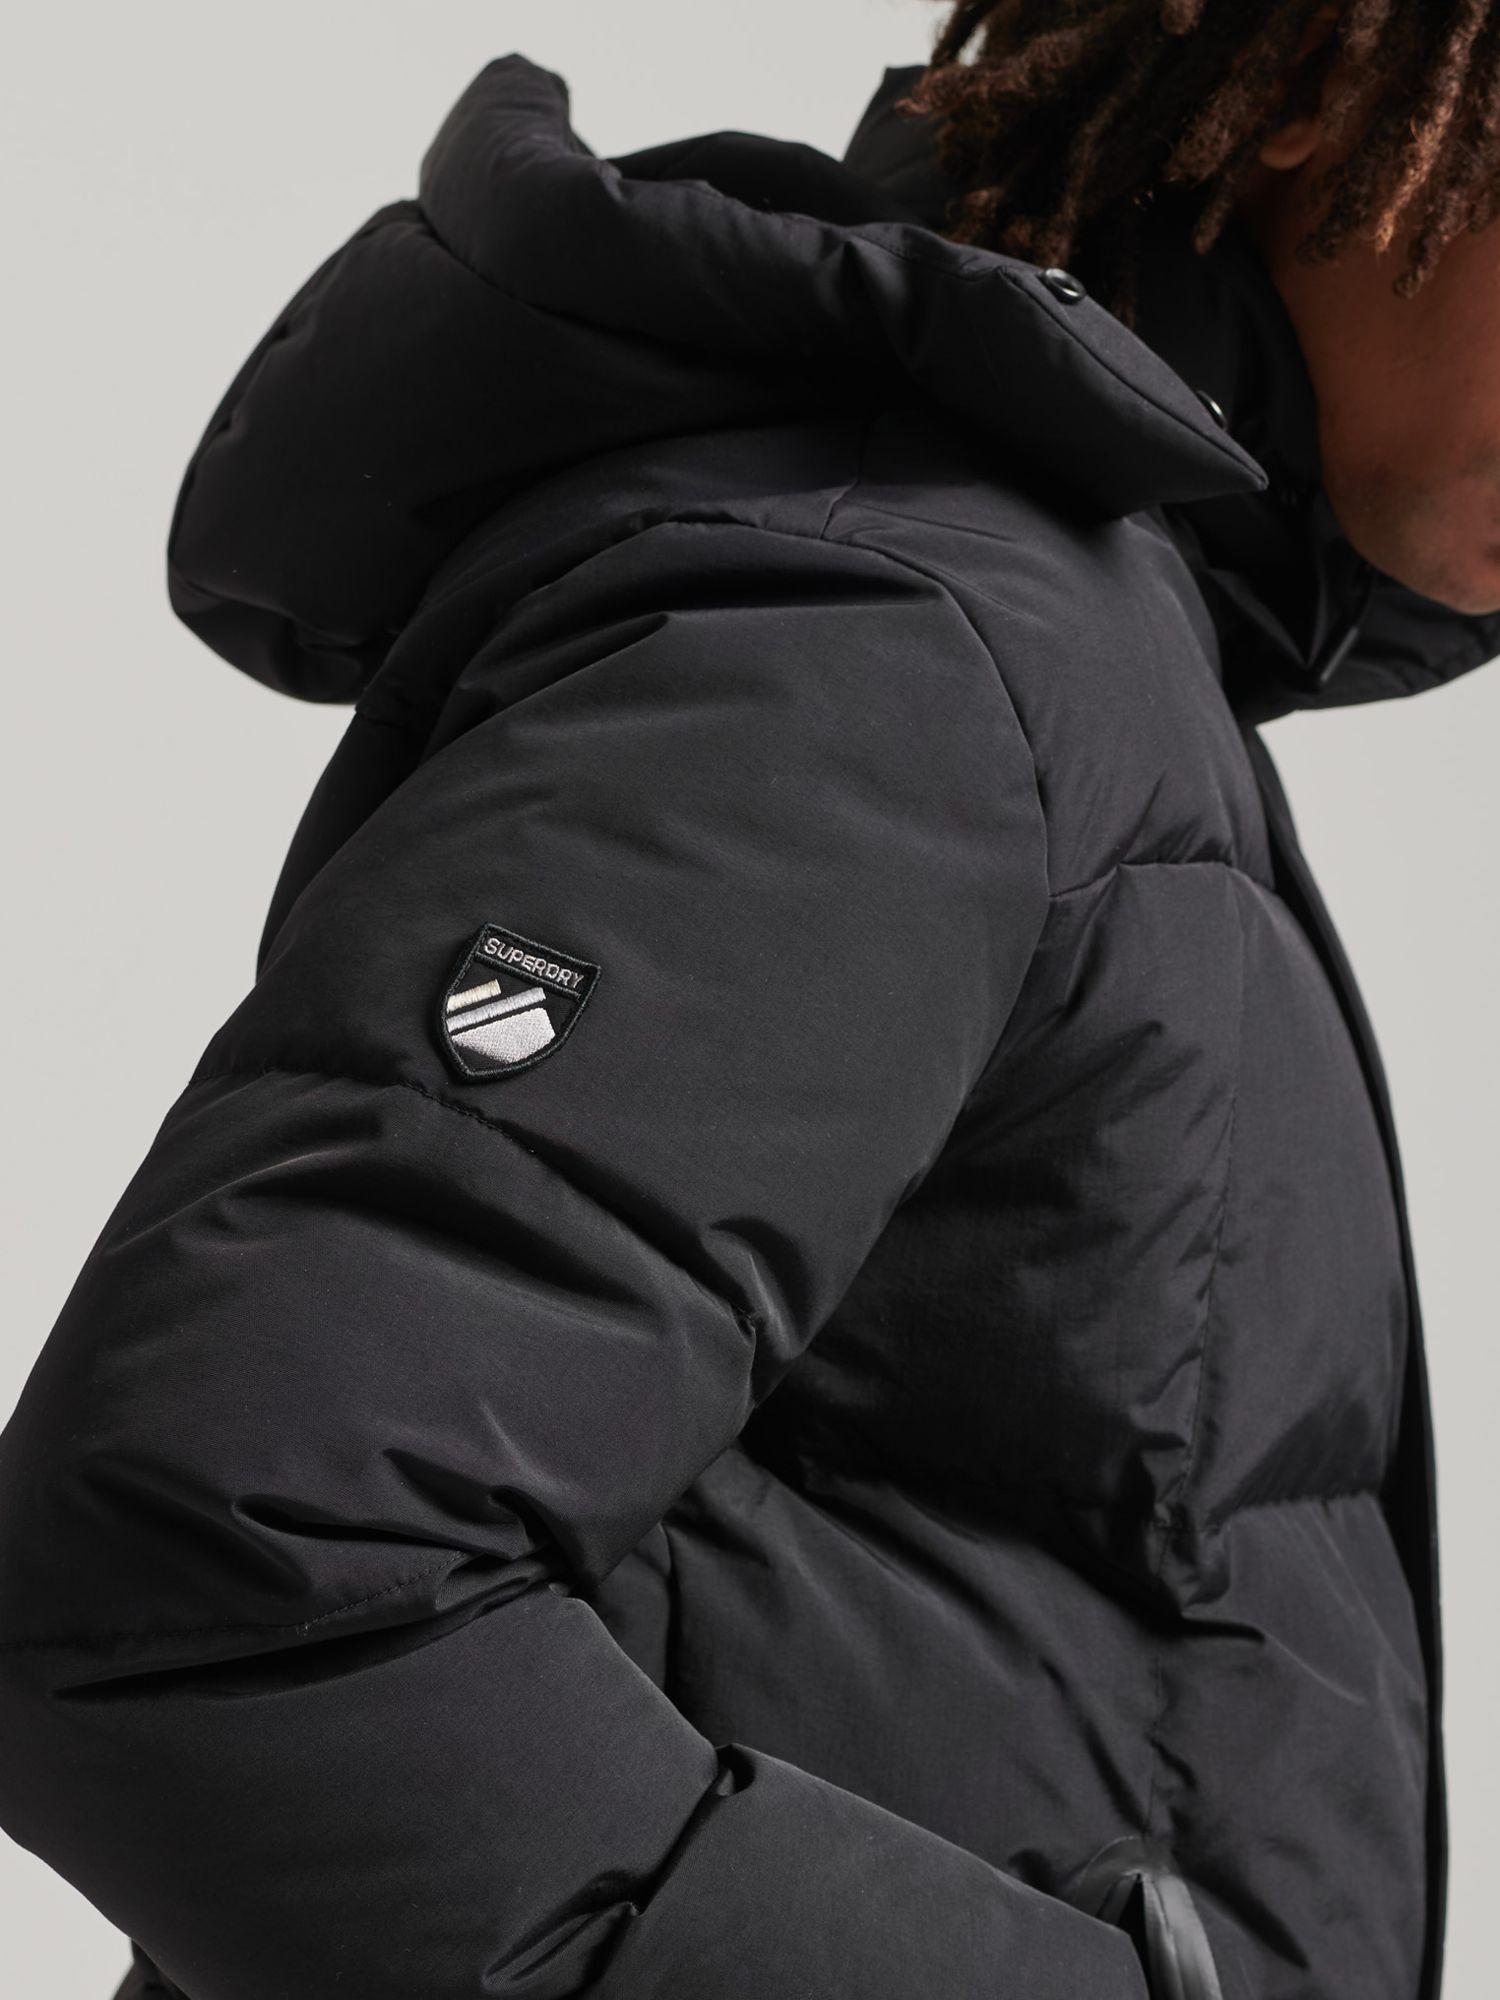 Superdry Hooded Box Quilt Puffer Jacket, Black, S